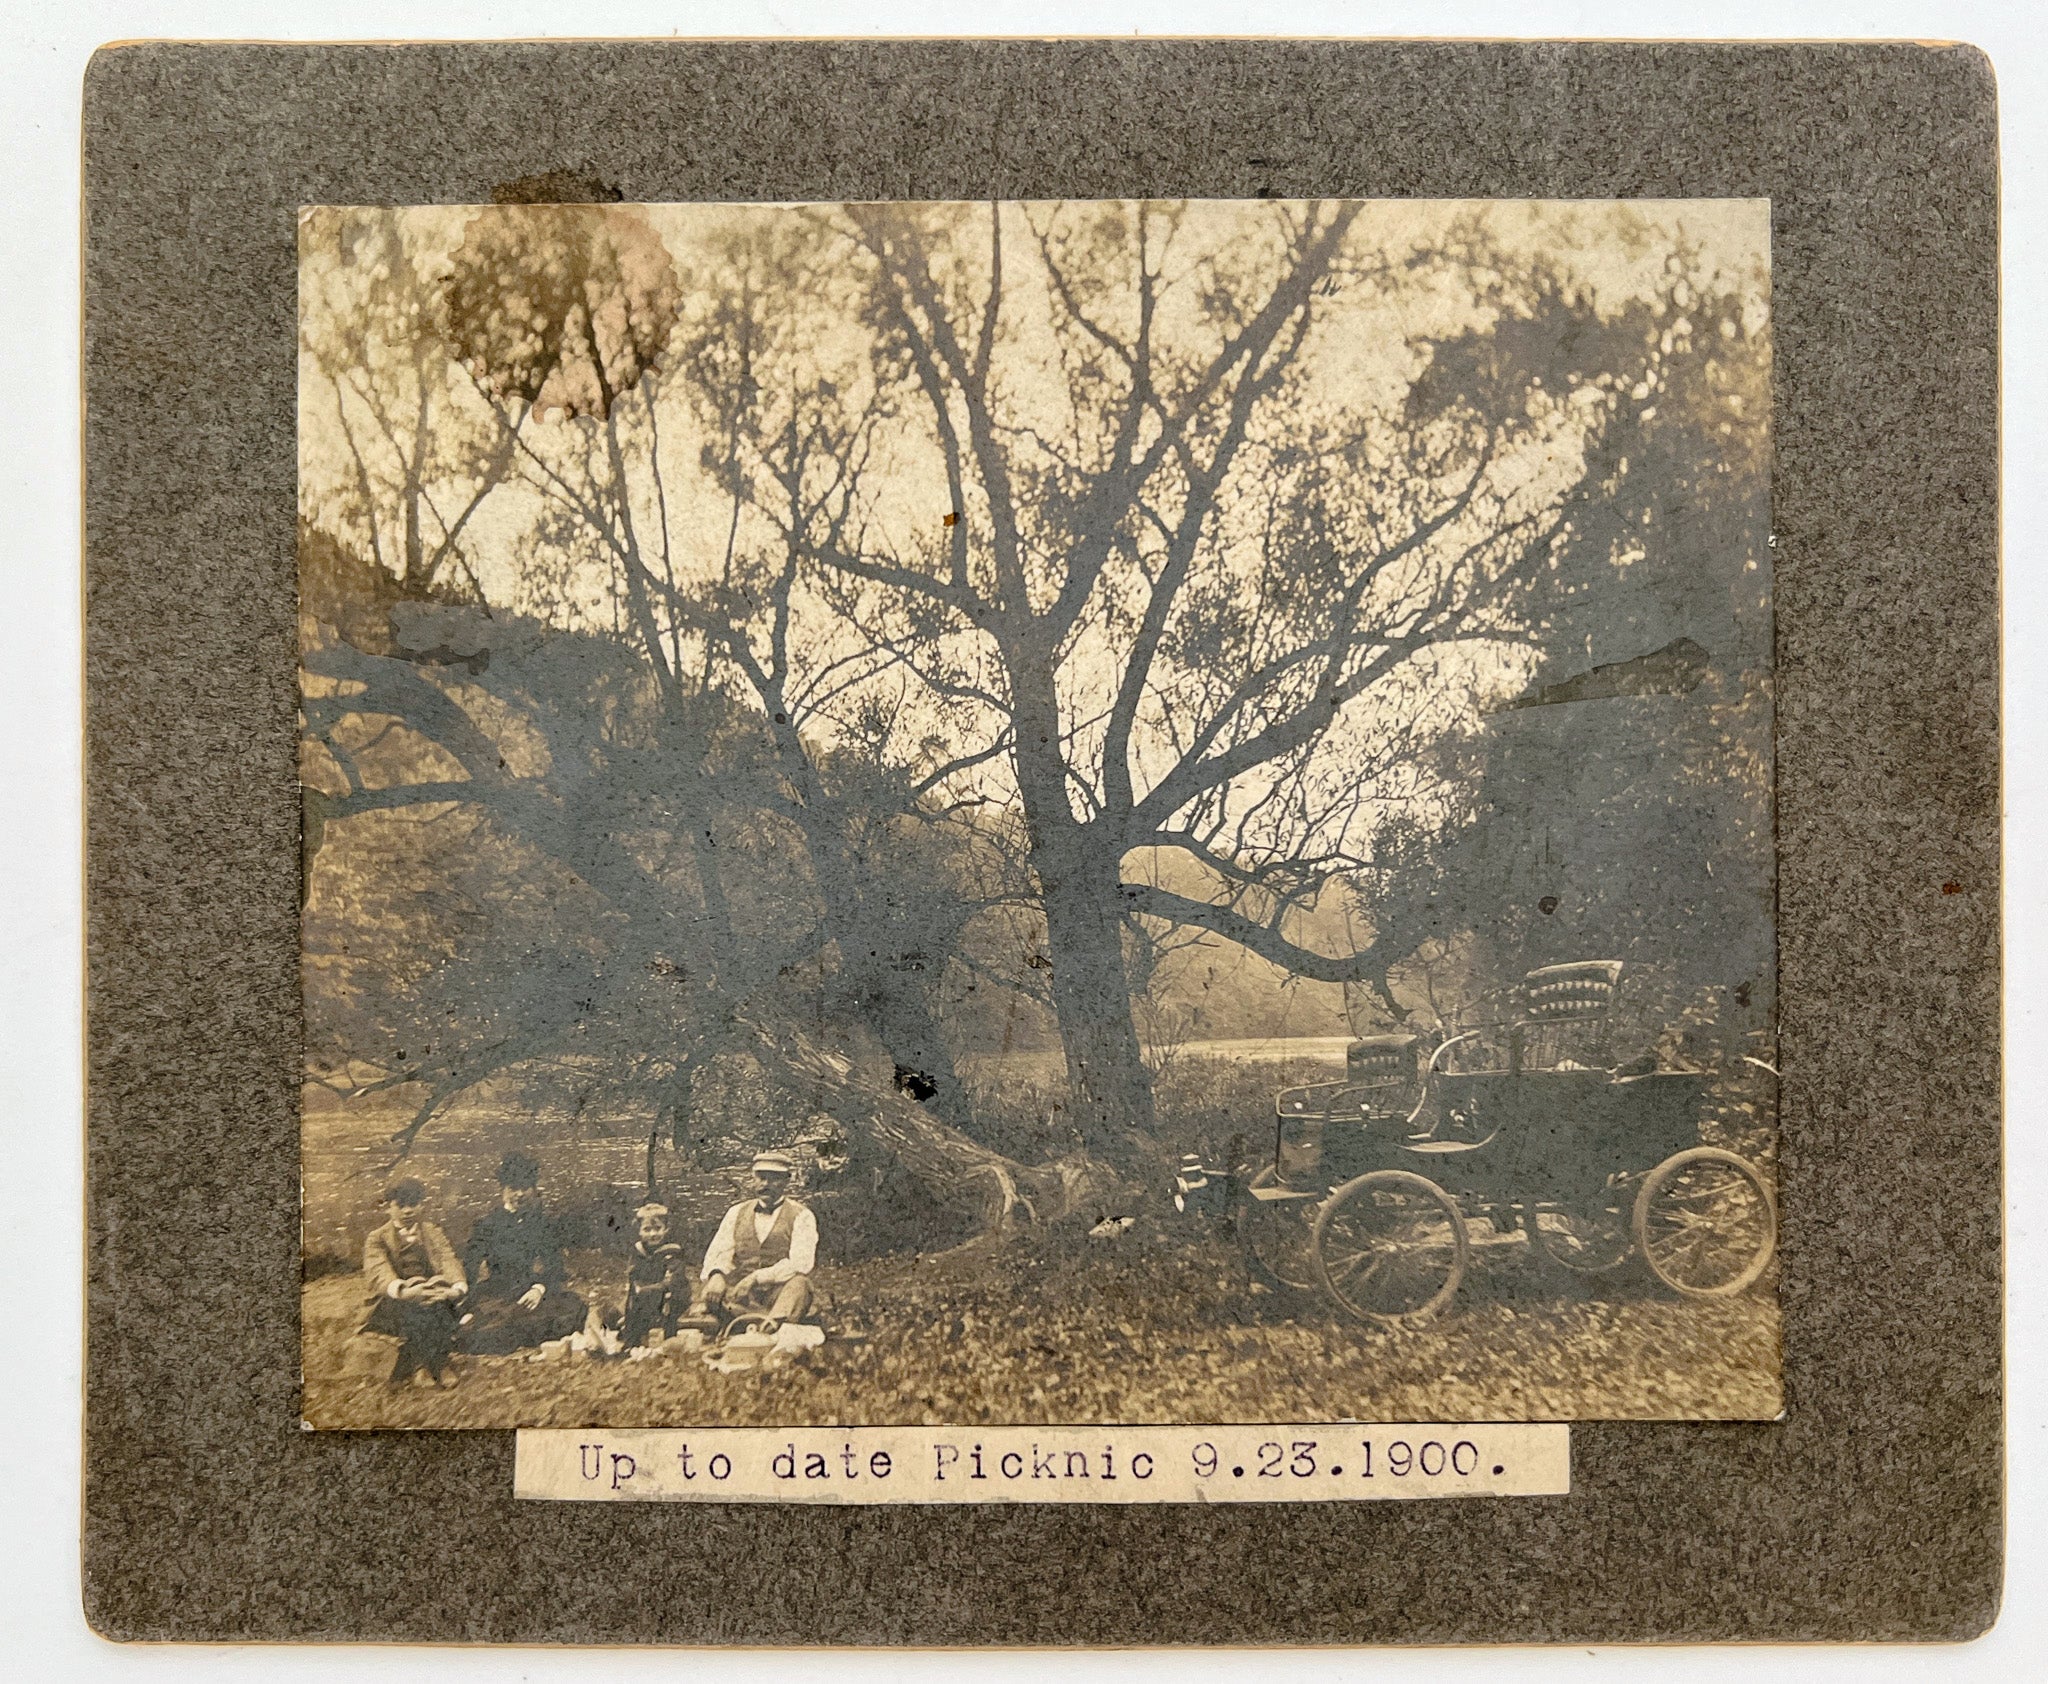 Mounted photo of a riverside family picnic with early automobile, 1900